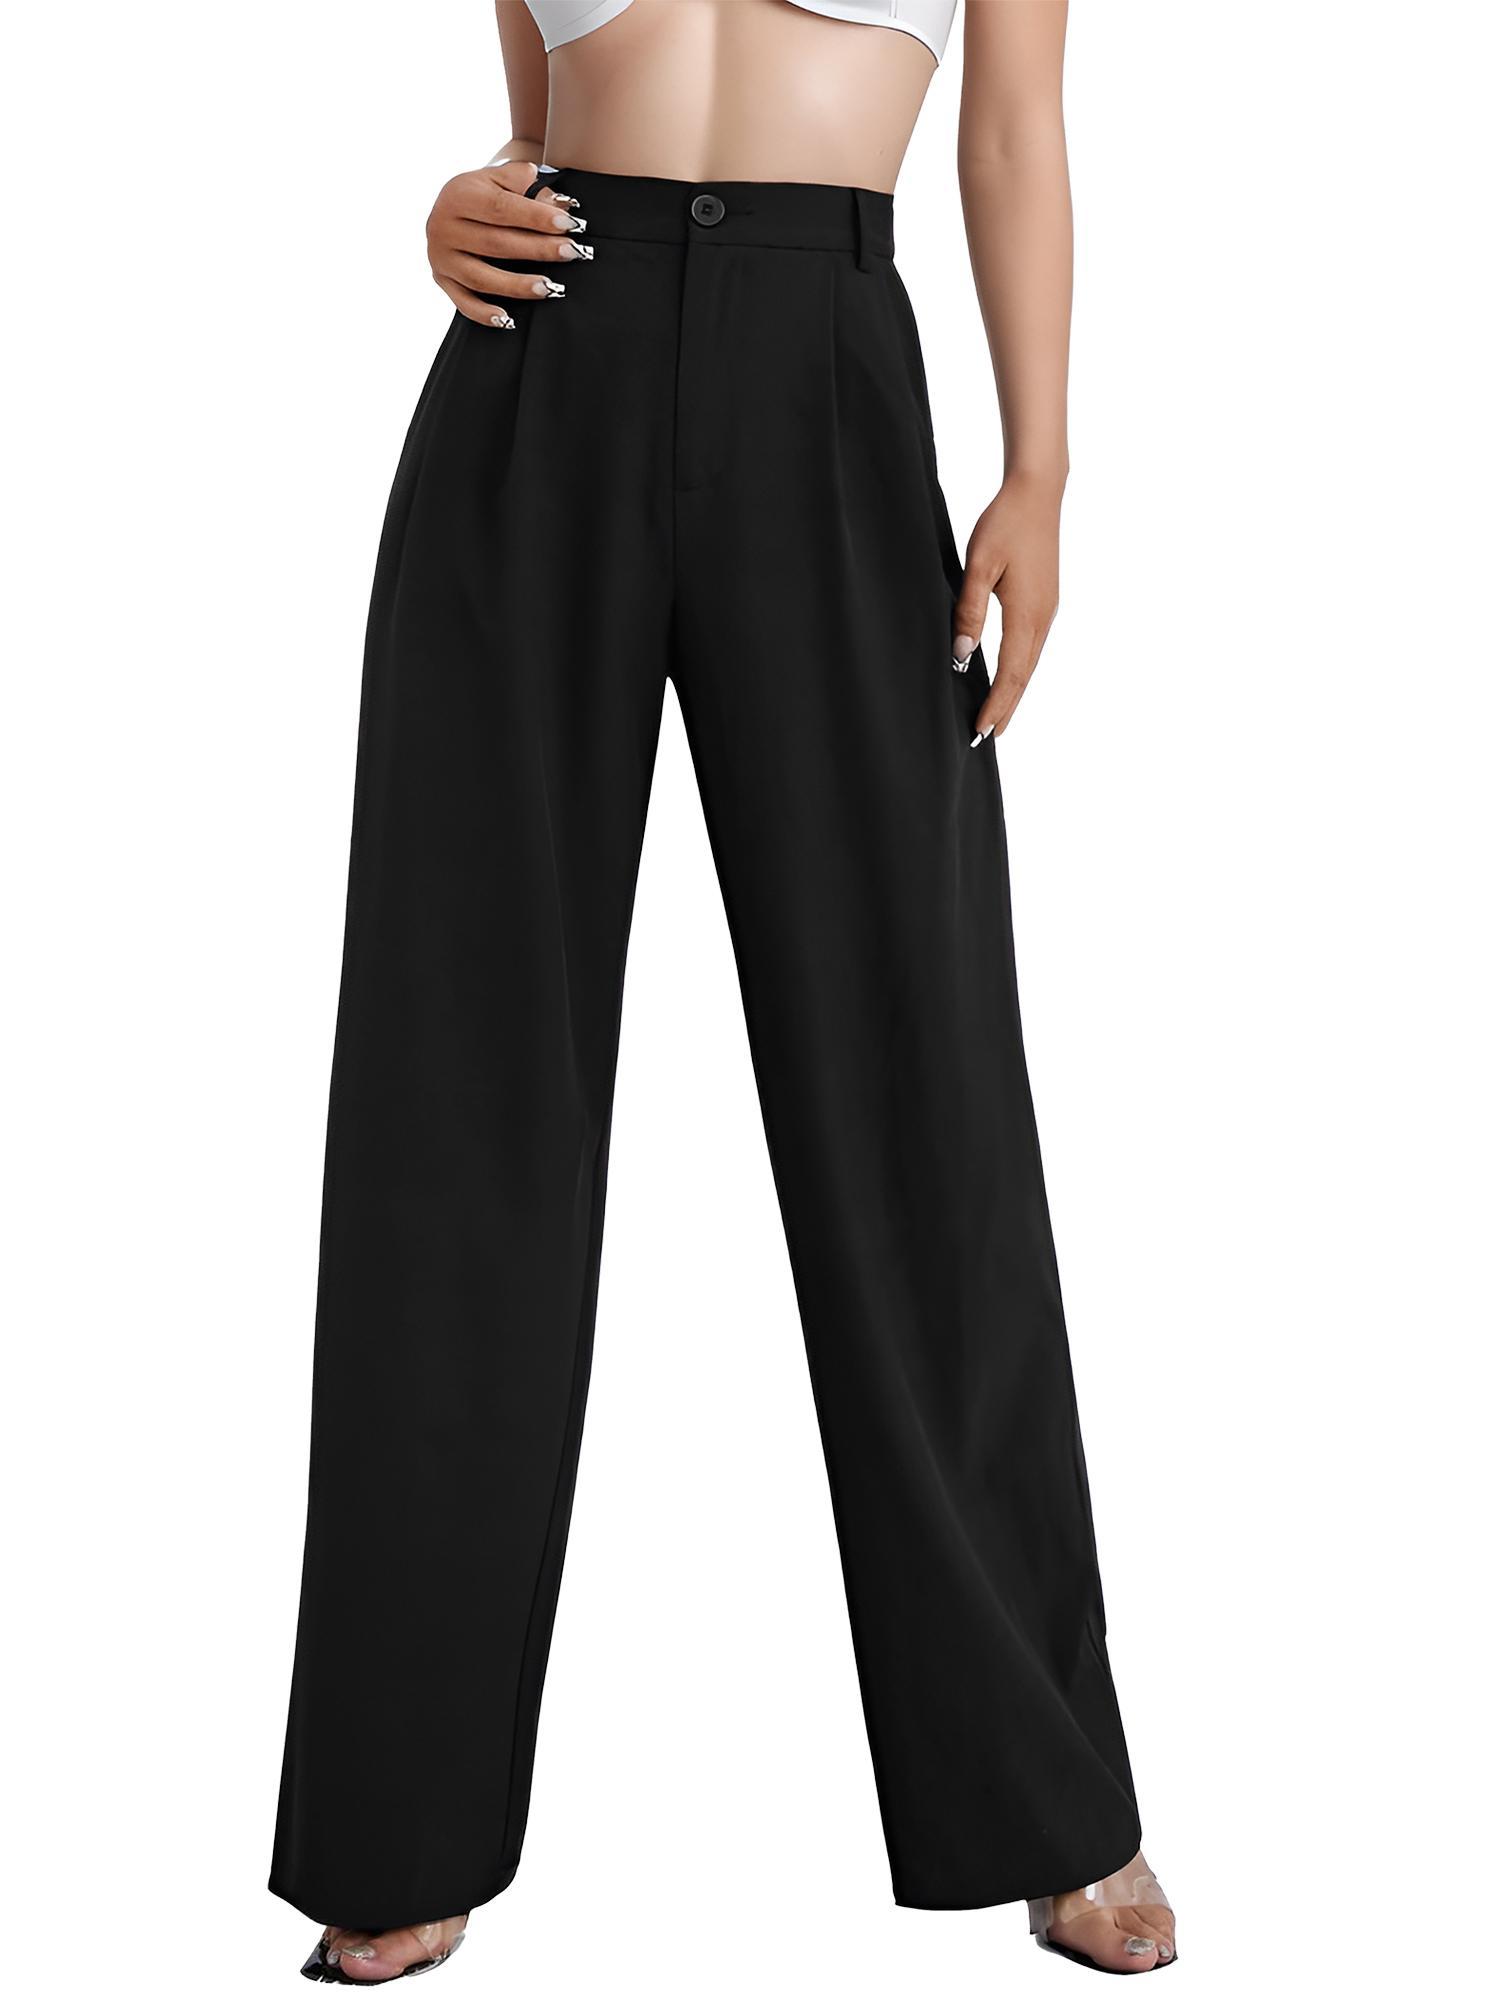 Onegirl Going Out Pants for Women Club Sexy Palazzo Pants for Women ...